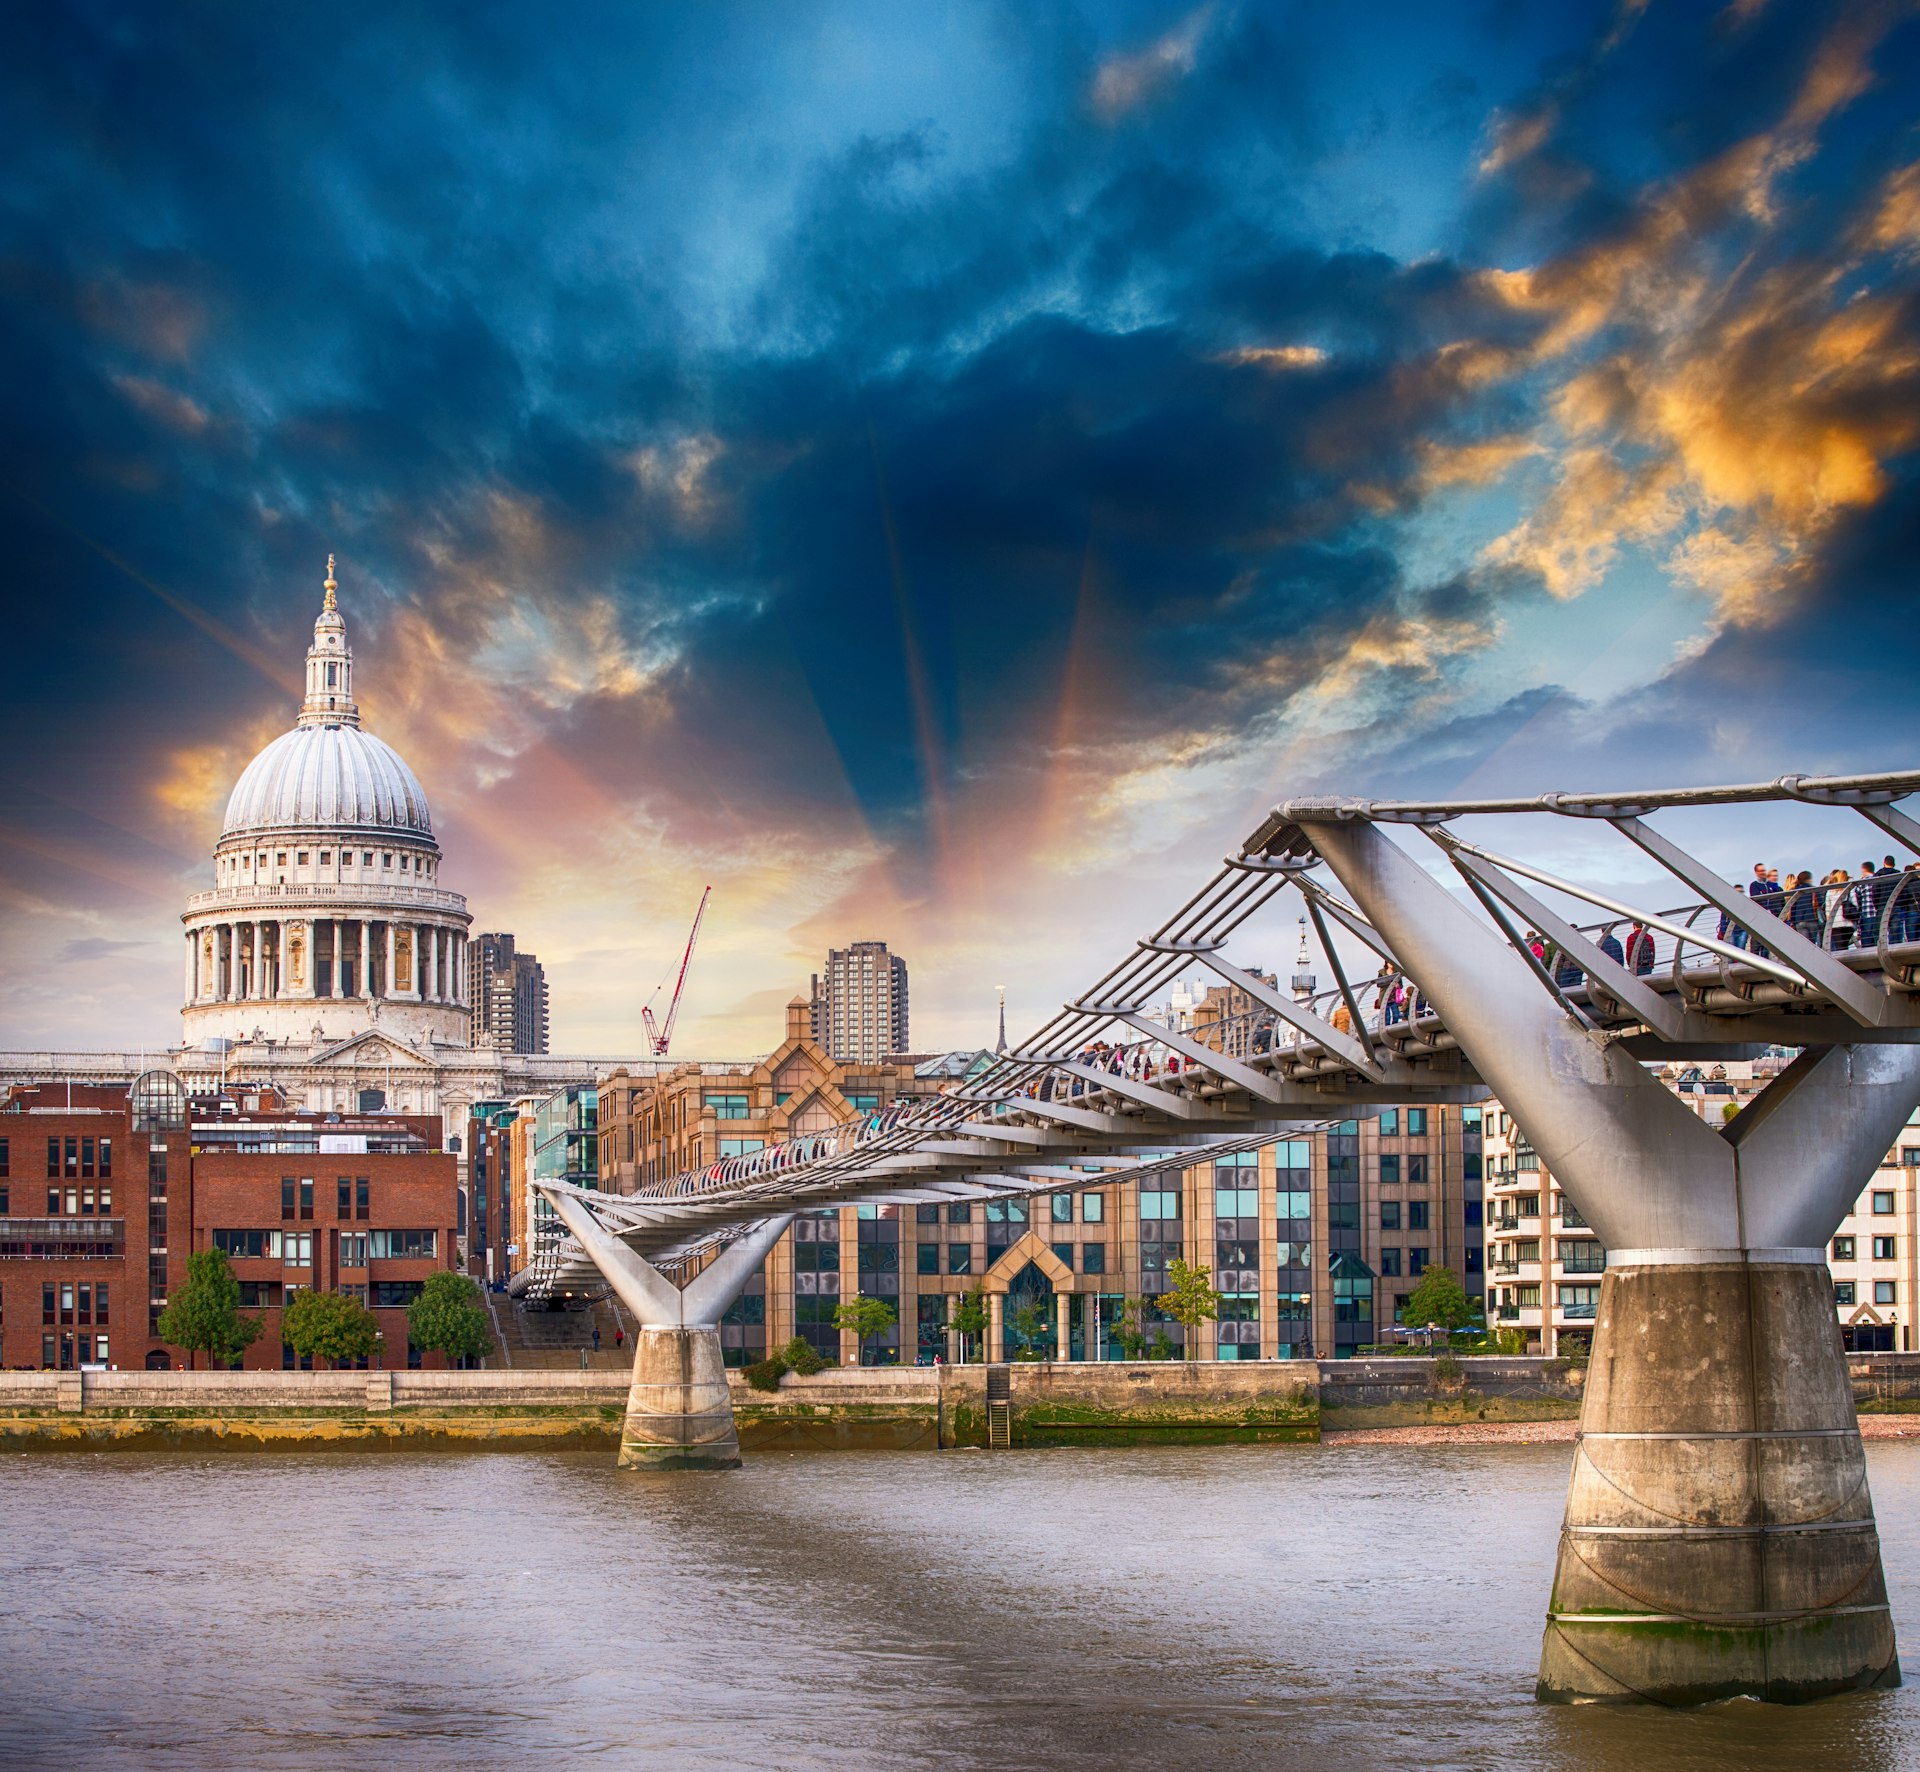 A metal footbridge spans a wide river, leading to a domed church building. There's an atmospheric sky of dark clouds and sunlight.